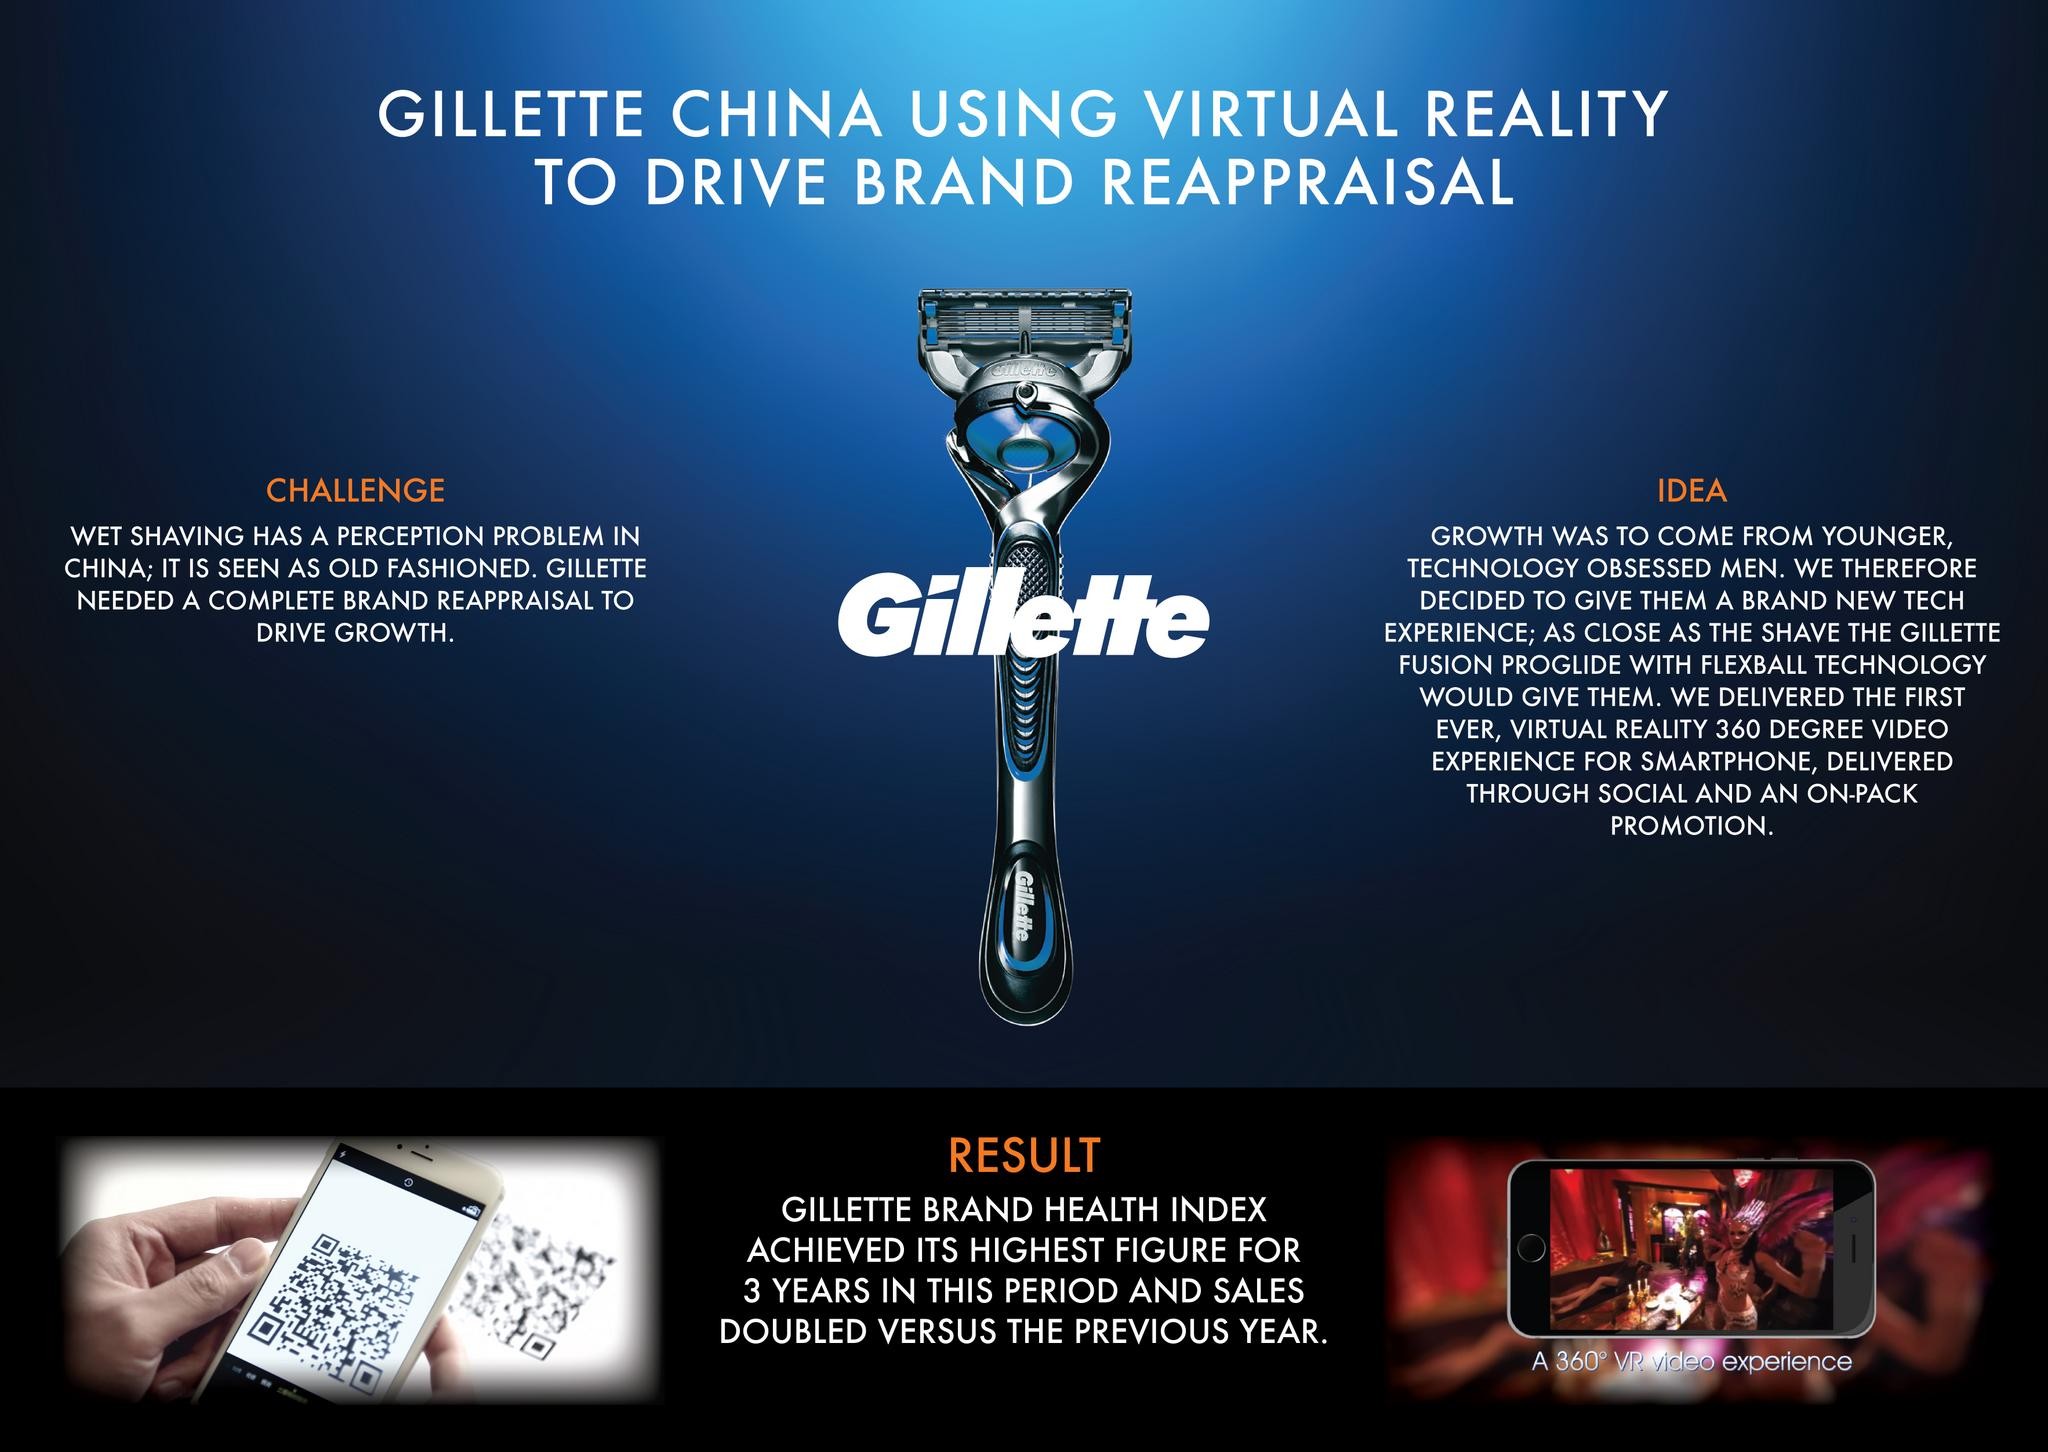 Gillette China – Using Virtual Reality to drive brand reappraisal